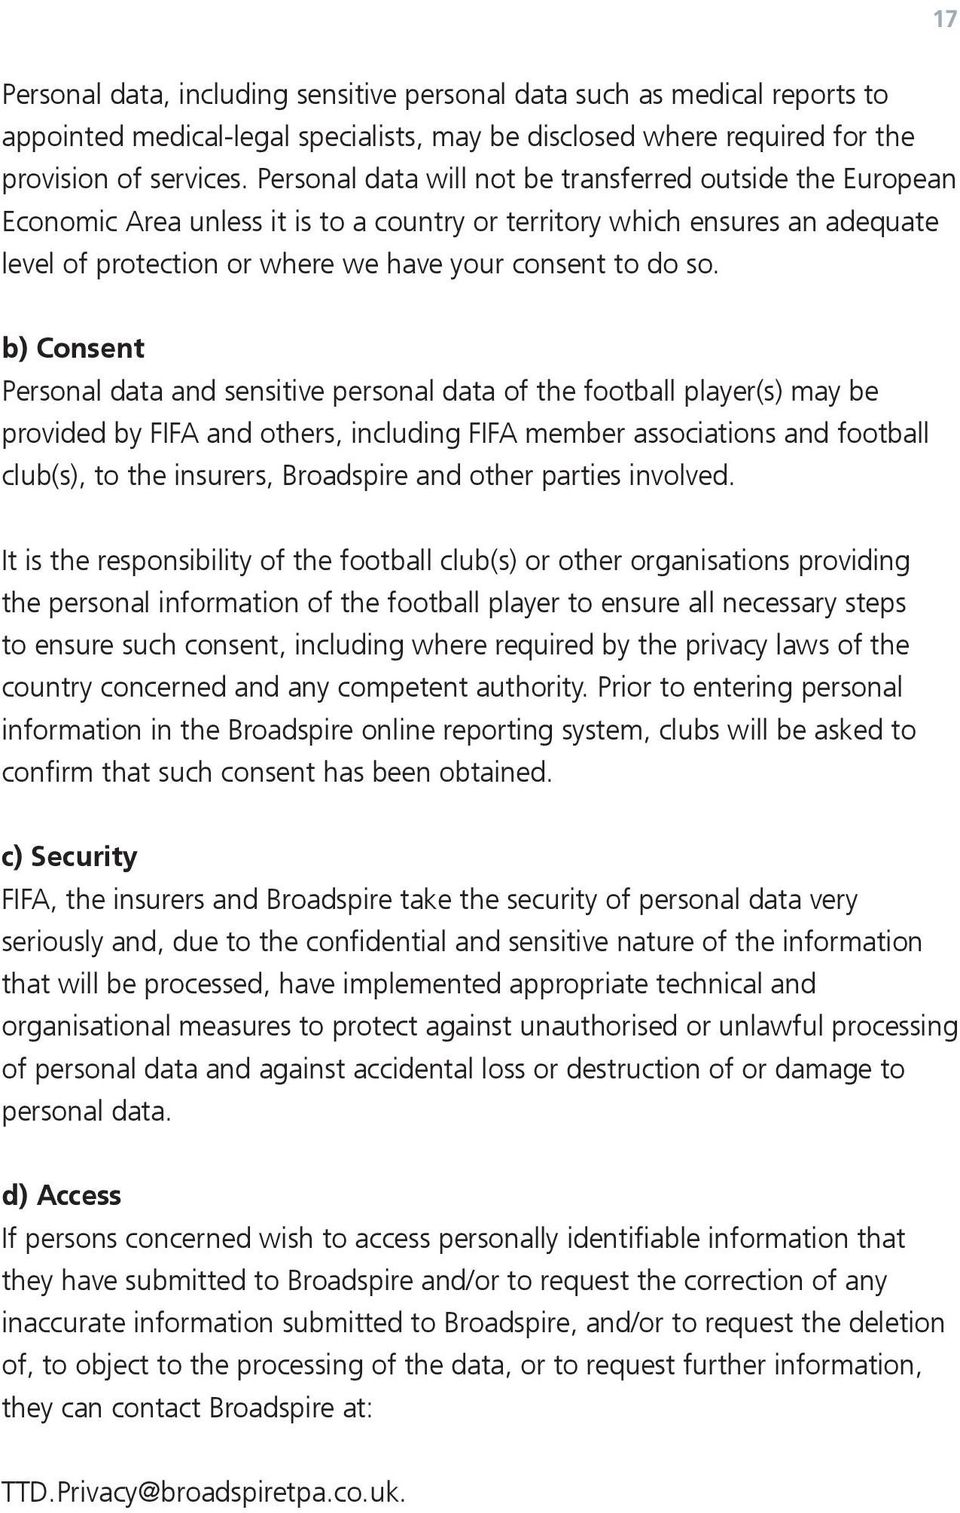 b) Consent Personal data sensitive personal data football player(s) may be provided by FIFA ors, including FIFA member associations football club(s), to insurers, Broadspire or parties involved.